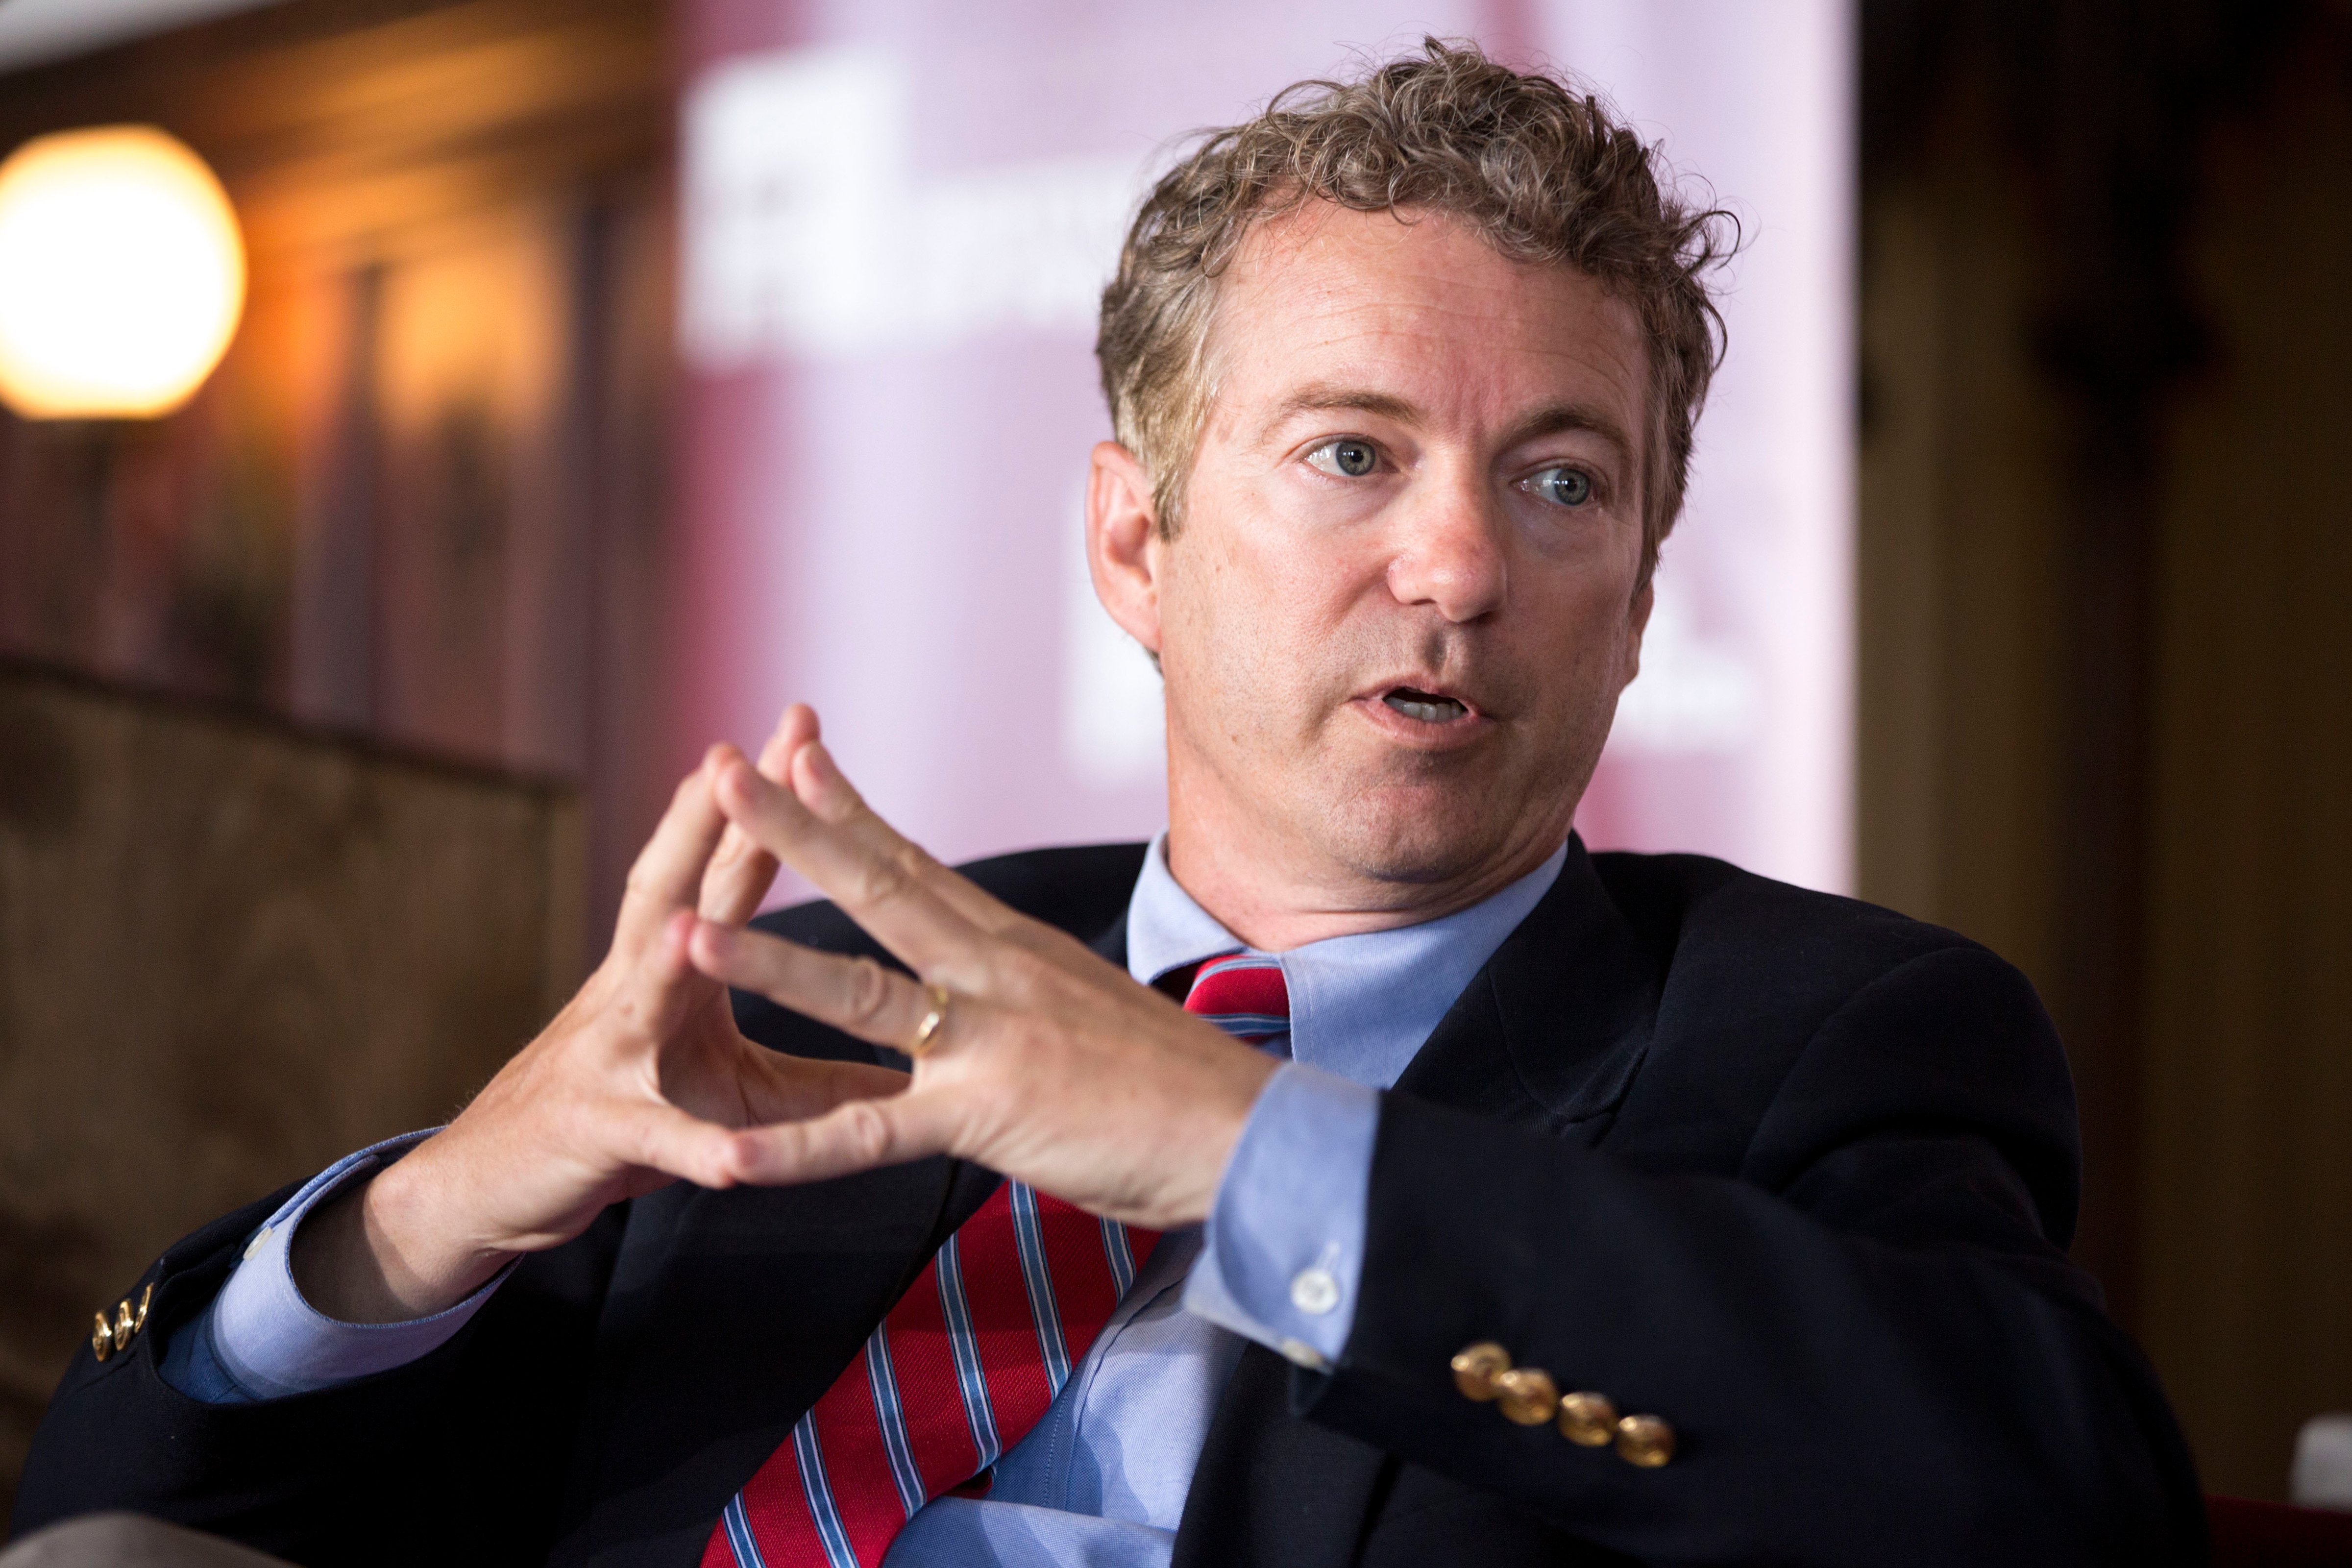 Sen. Rand Paul, R-Ky., speaks during an event at the University of Chicago's Ida Noyes Hall in Chicago on April 22, 2014. (Andrew Nelles—AP)